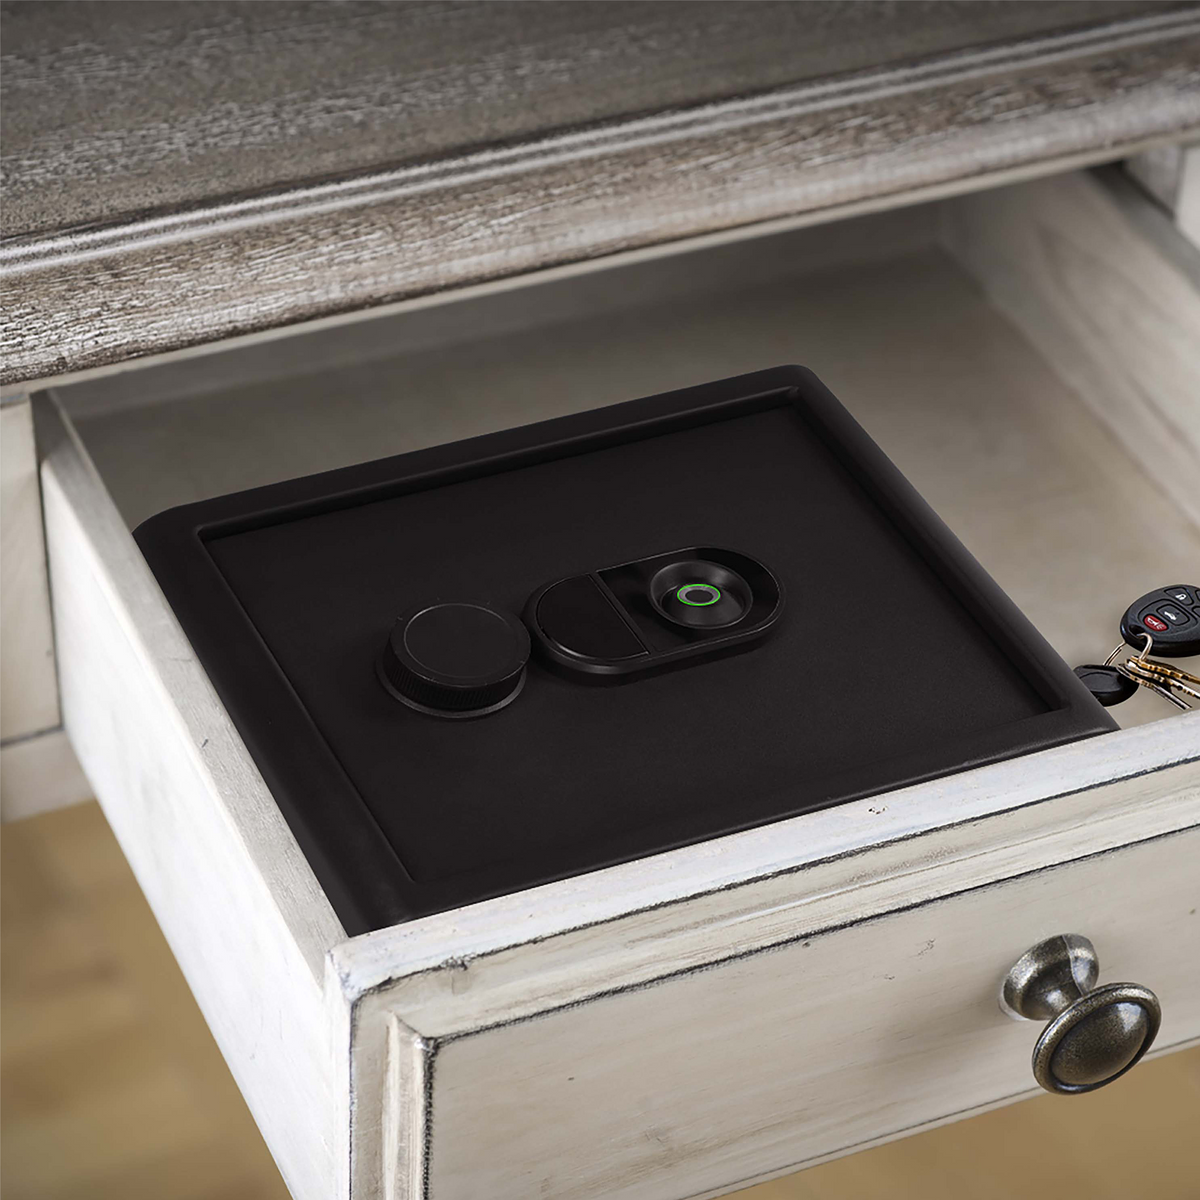 Sports Afield SA-PV1M-BIO Drawer Safe with Biometric Lock Installed in Drawer